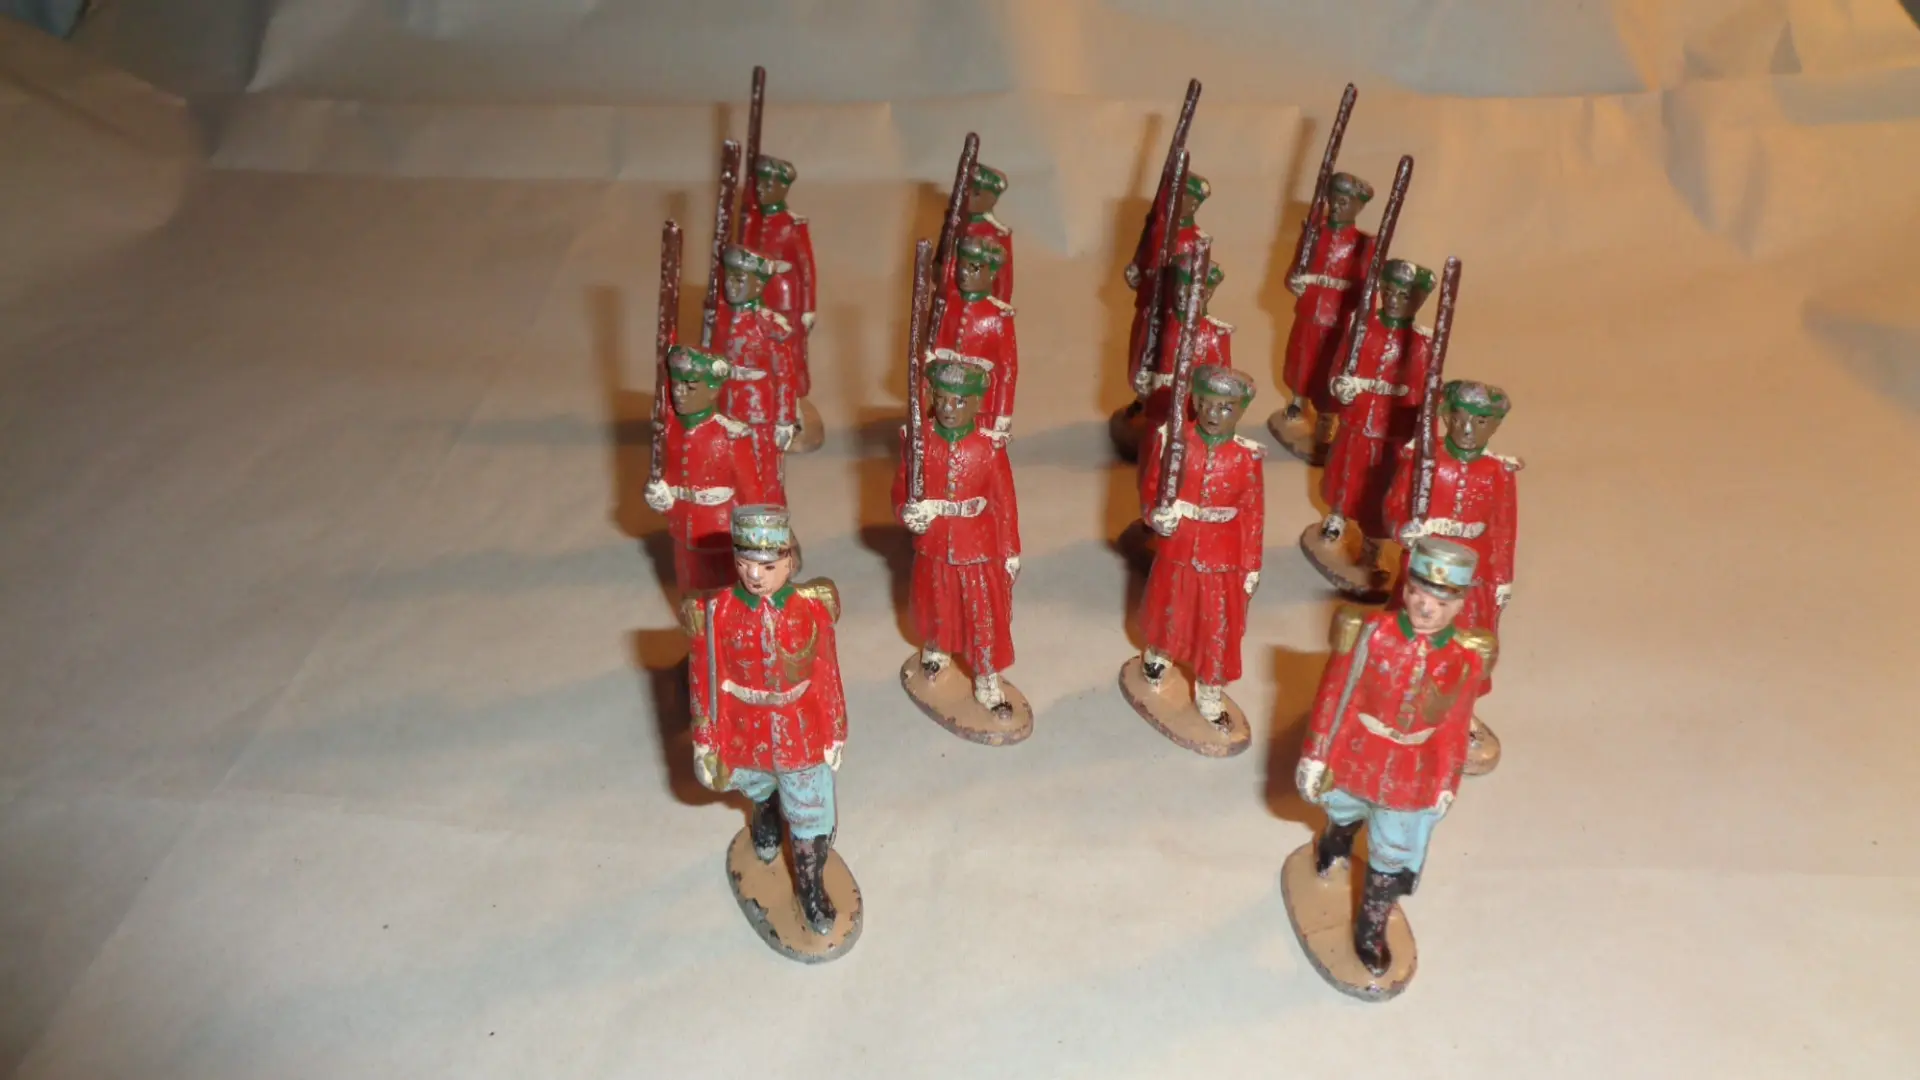 Display of French made Metal King of Morocco Guard figures